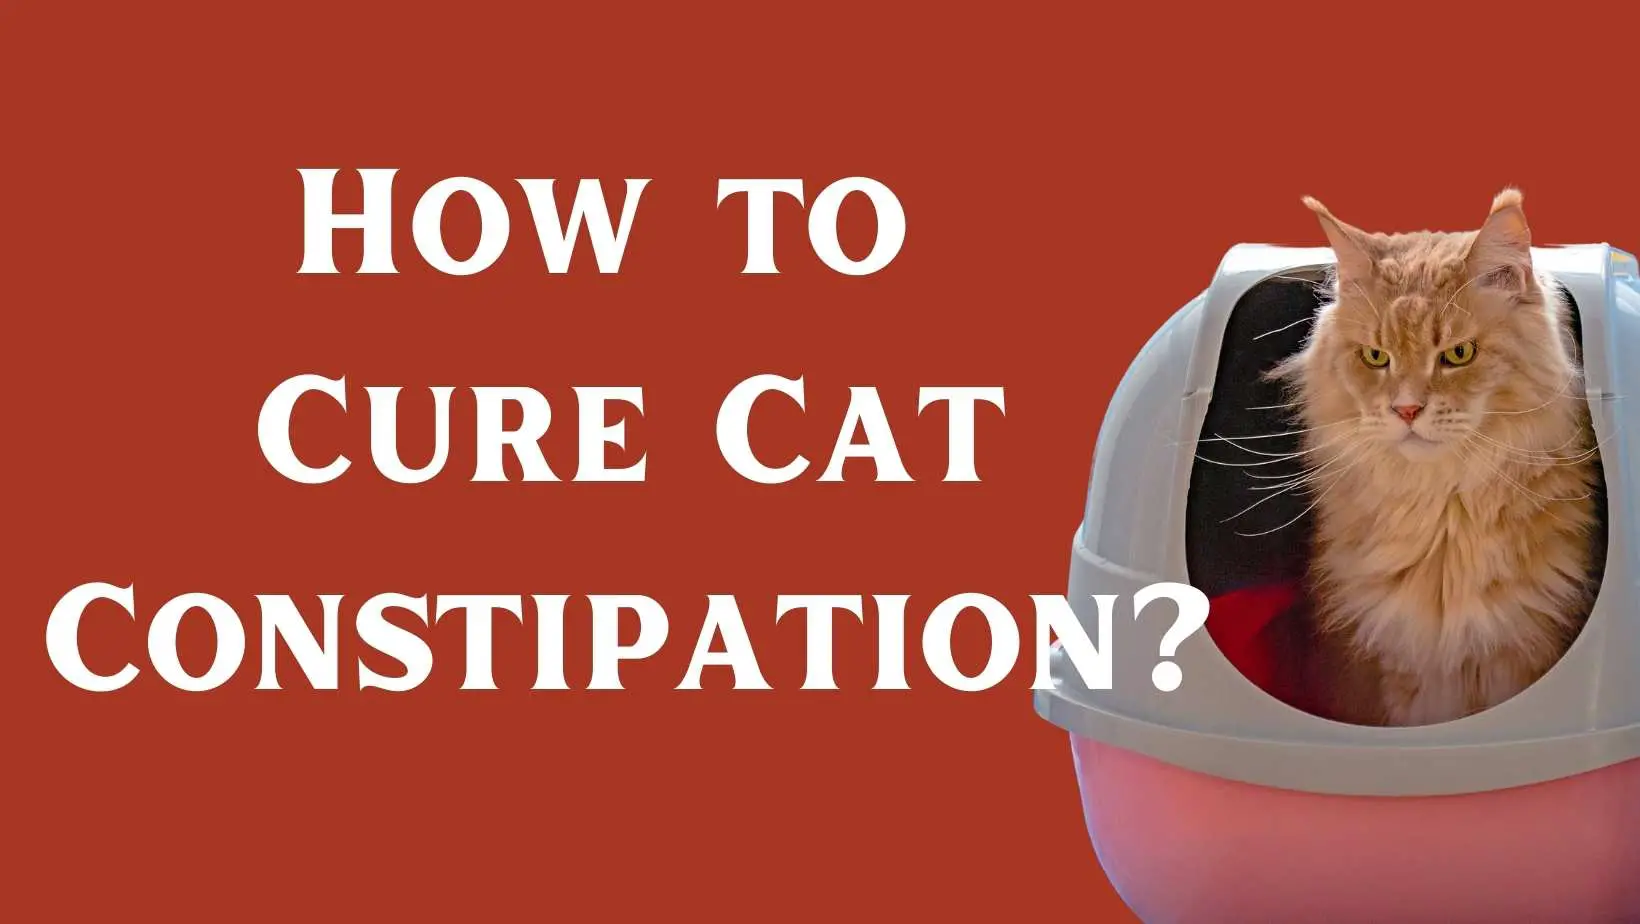 How to Cure Cat Constipation